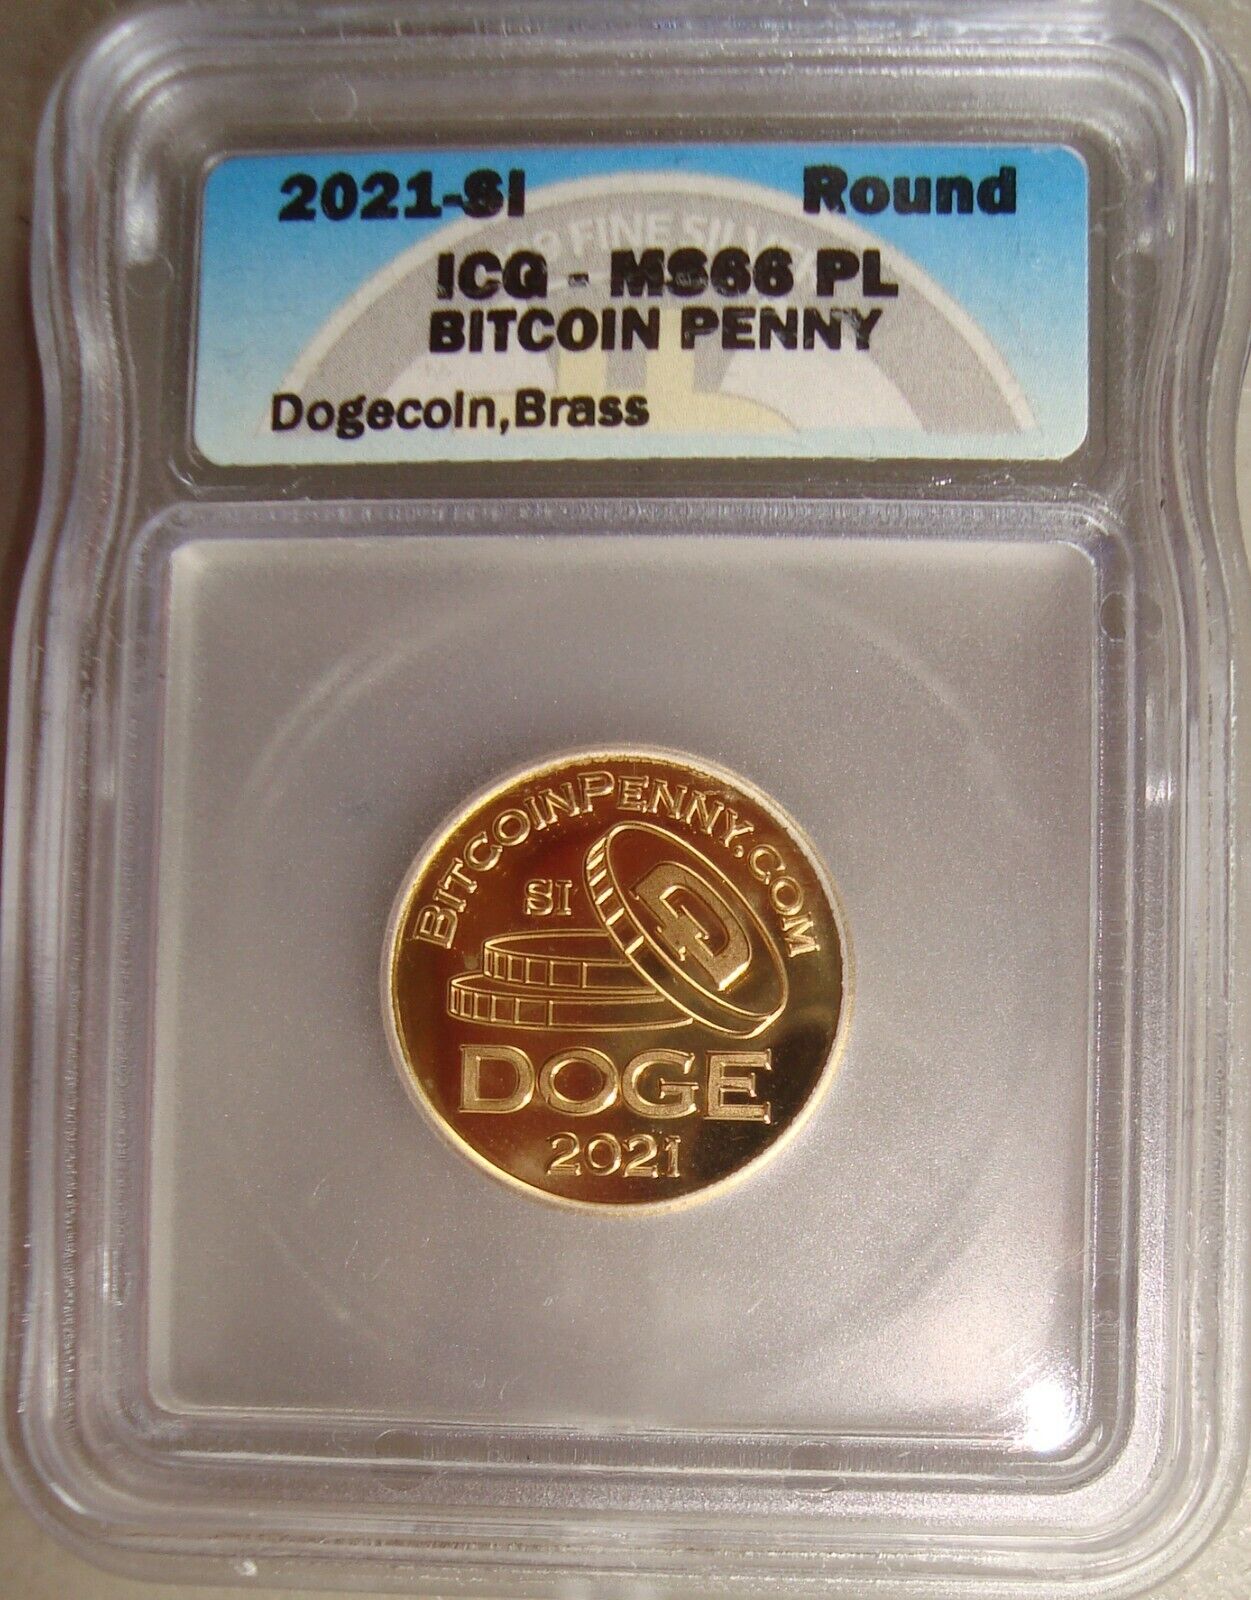 2021-SI BTC Penny, Dogecoin Type, Brass - 150 Mintage ICG MS66PL Cryptocurrency